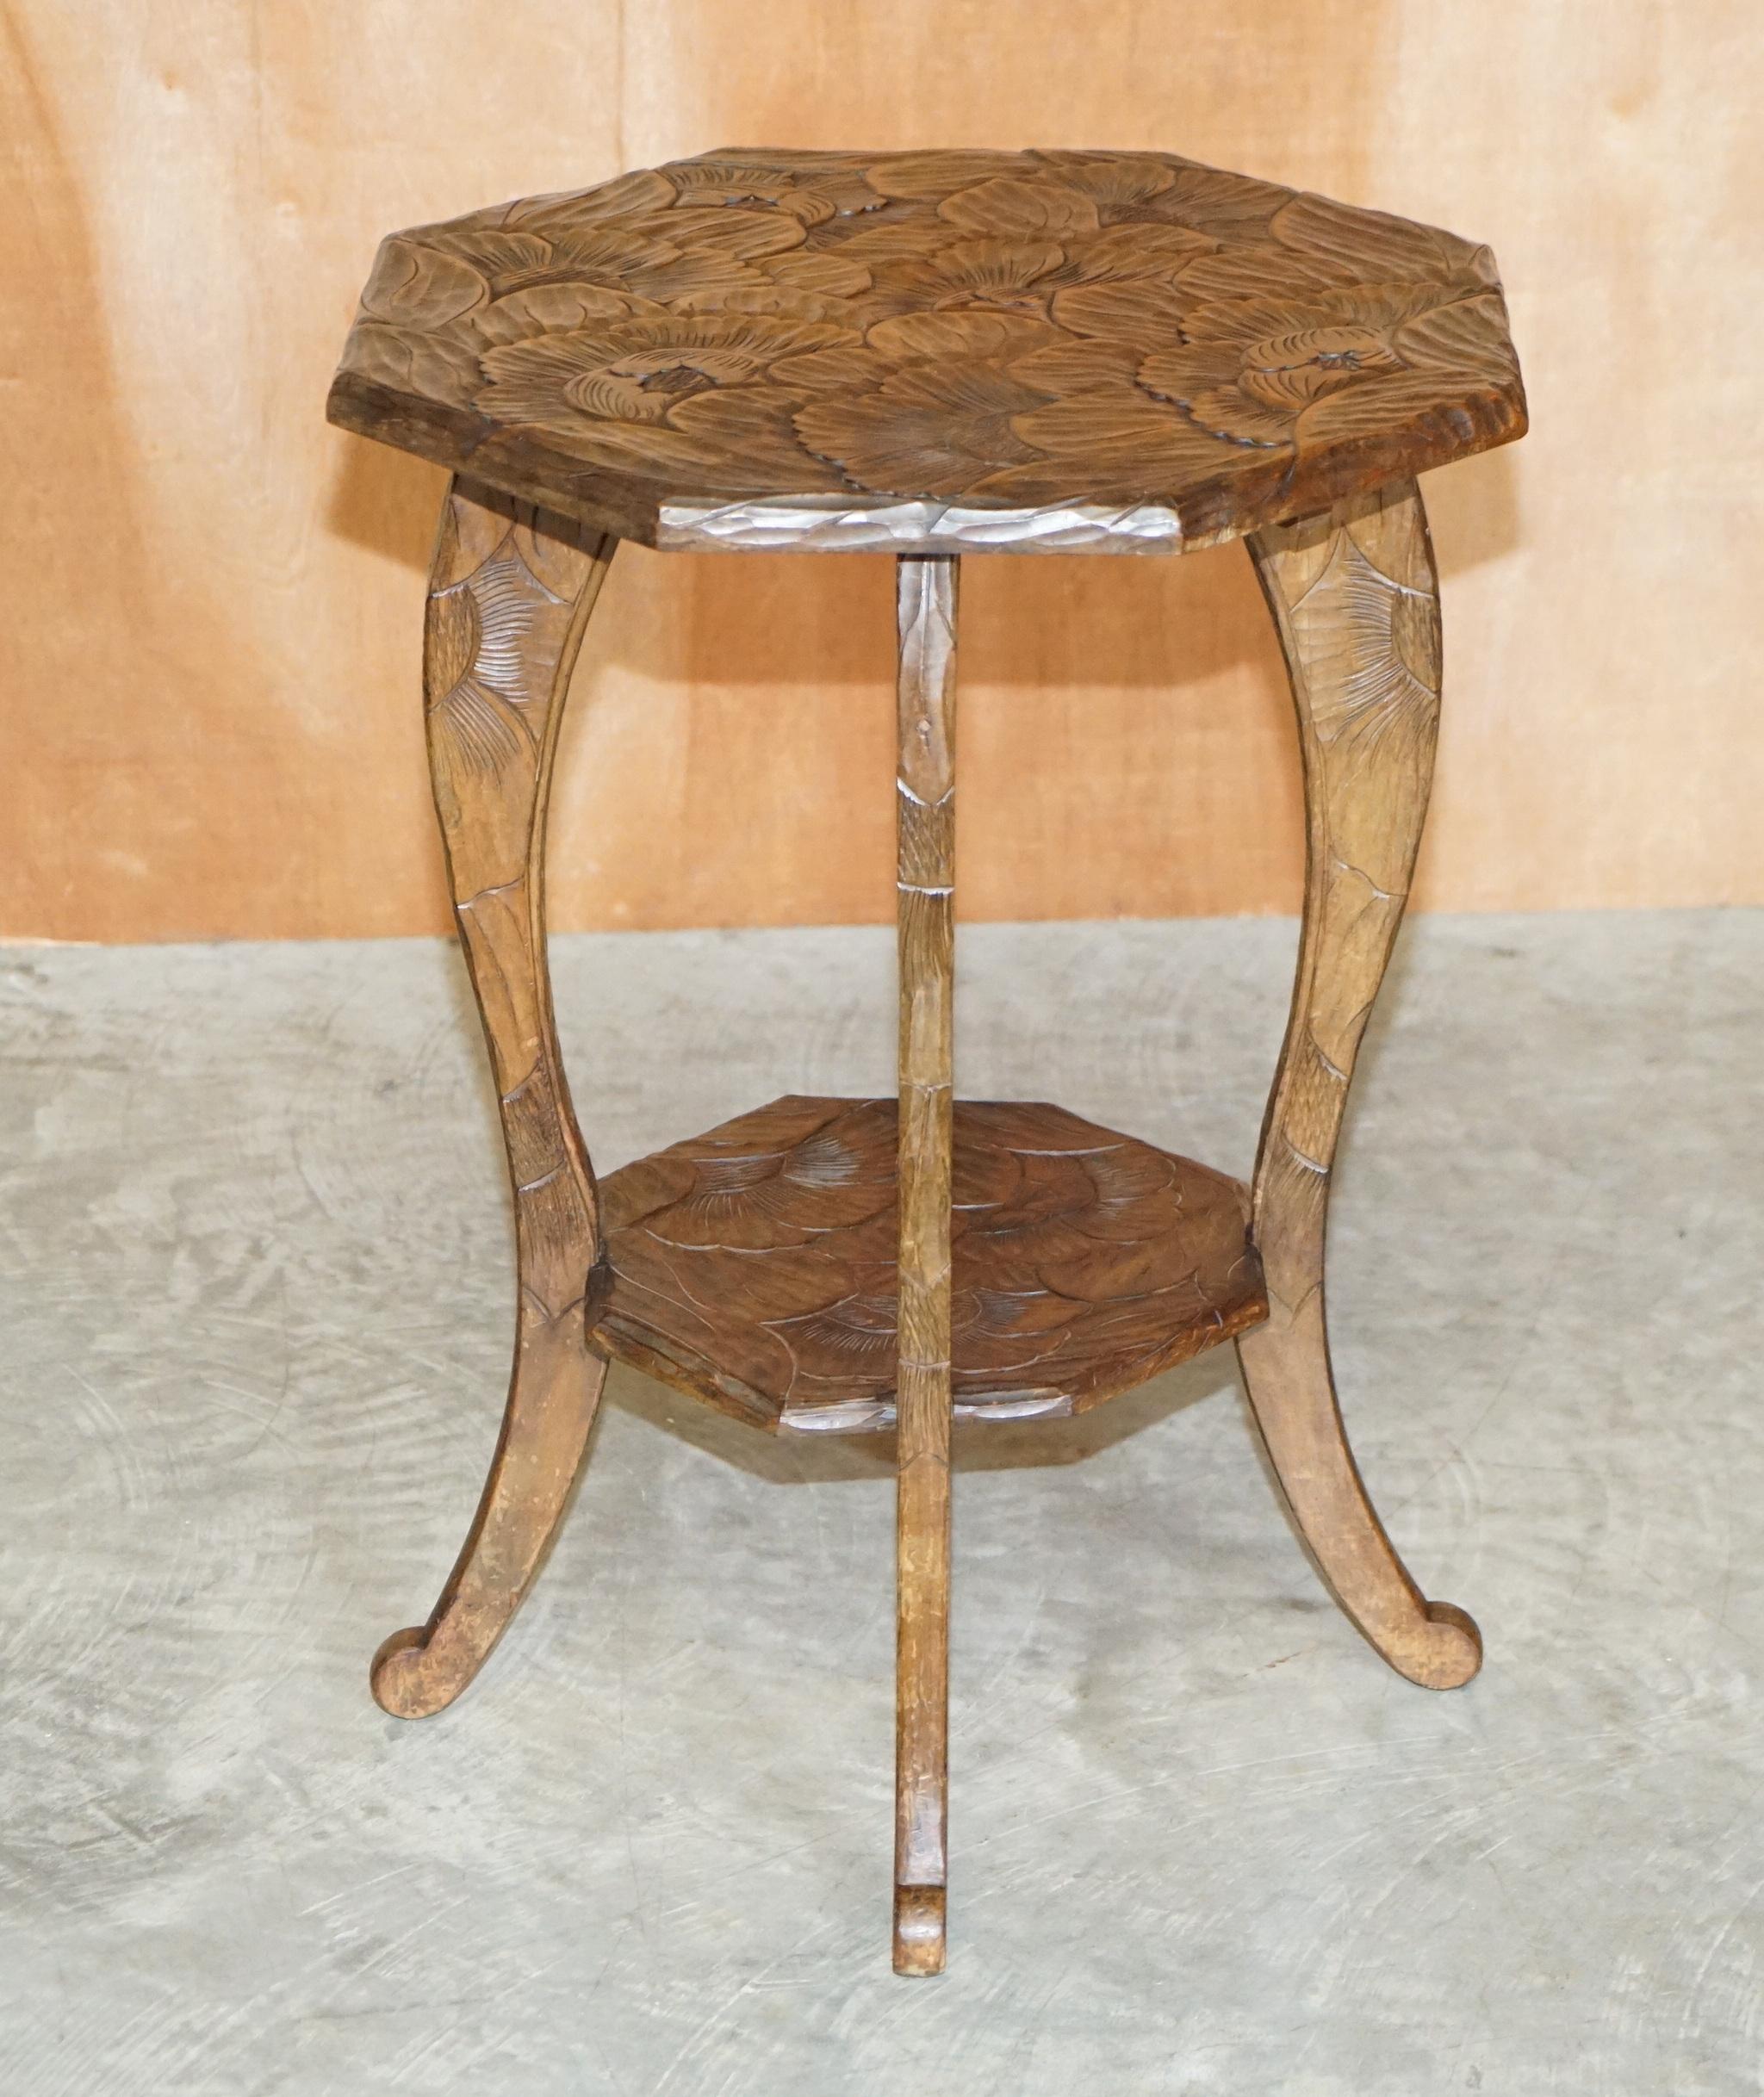 We are delighted to offer for sale this lovely large Liberty’s London 1905 oriental mahogany occasional table with original stamp to the base

A good-looking piece, its hand carved from top to bottom with floral detailing, I have variations of